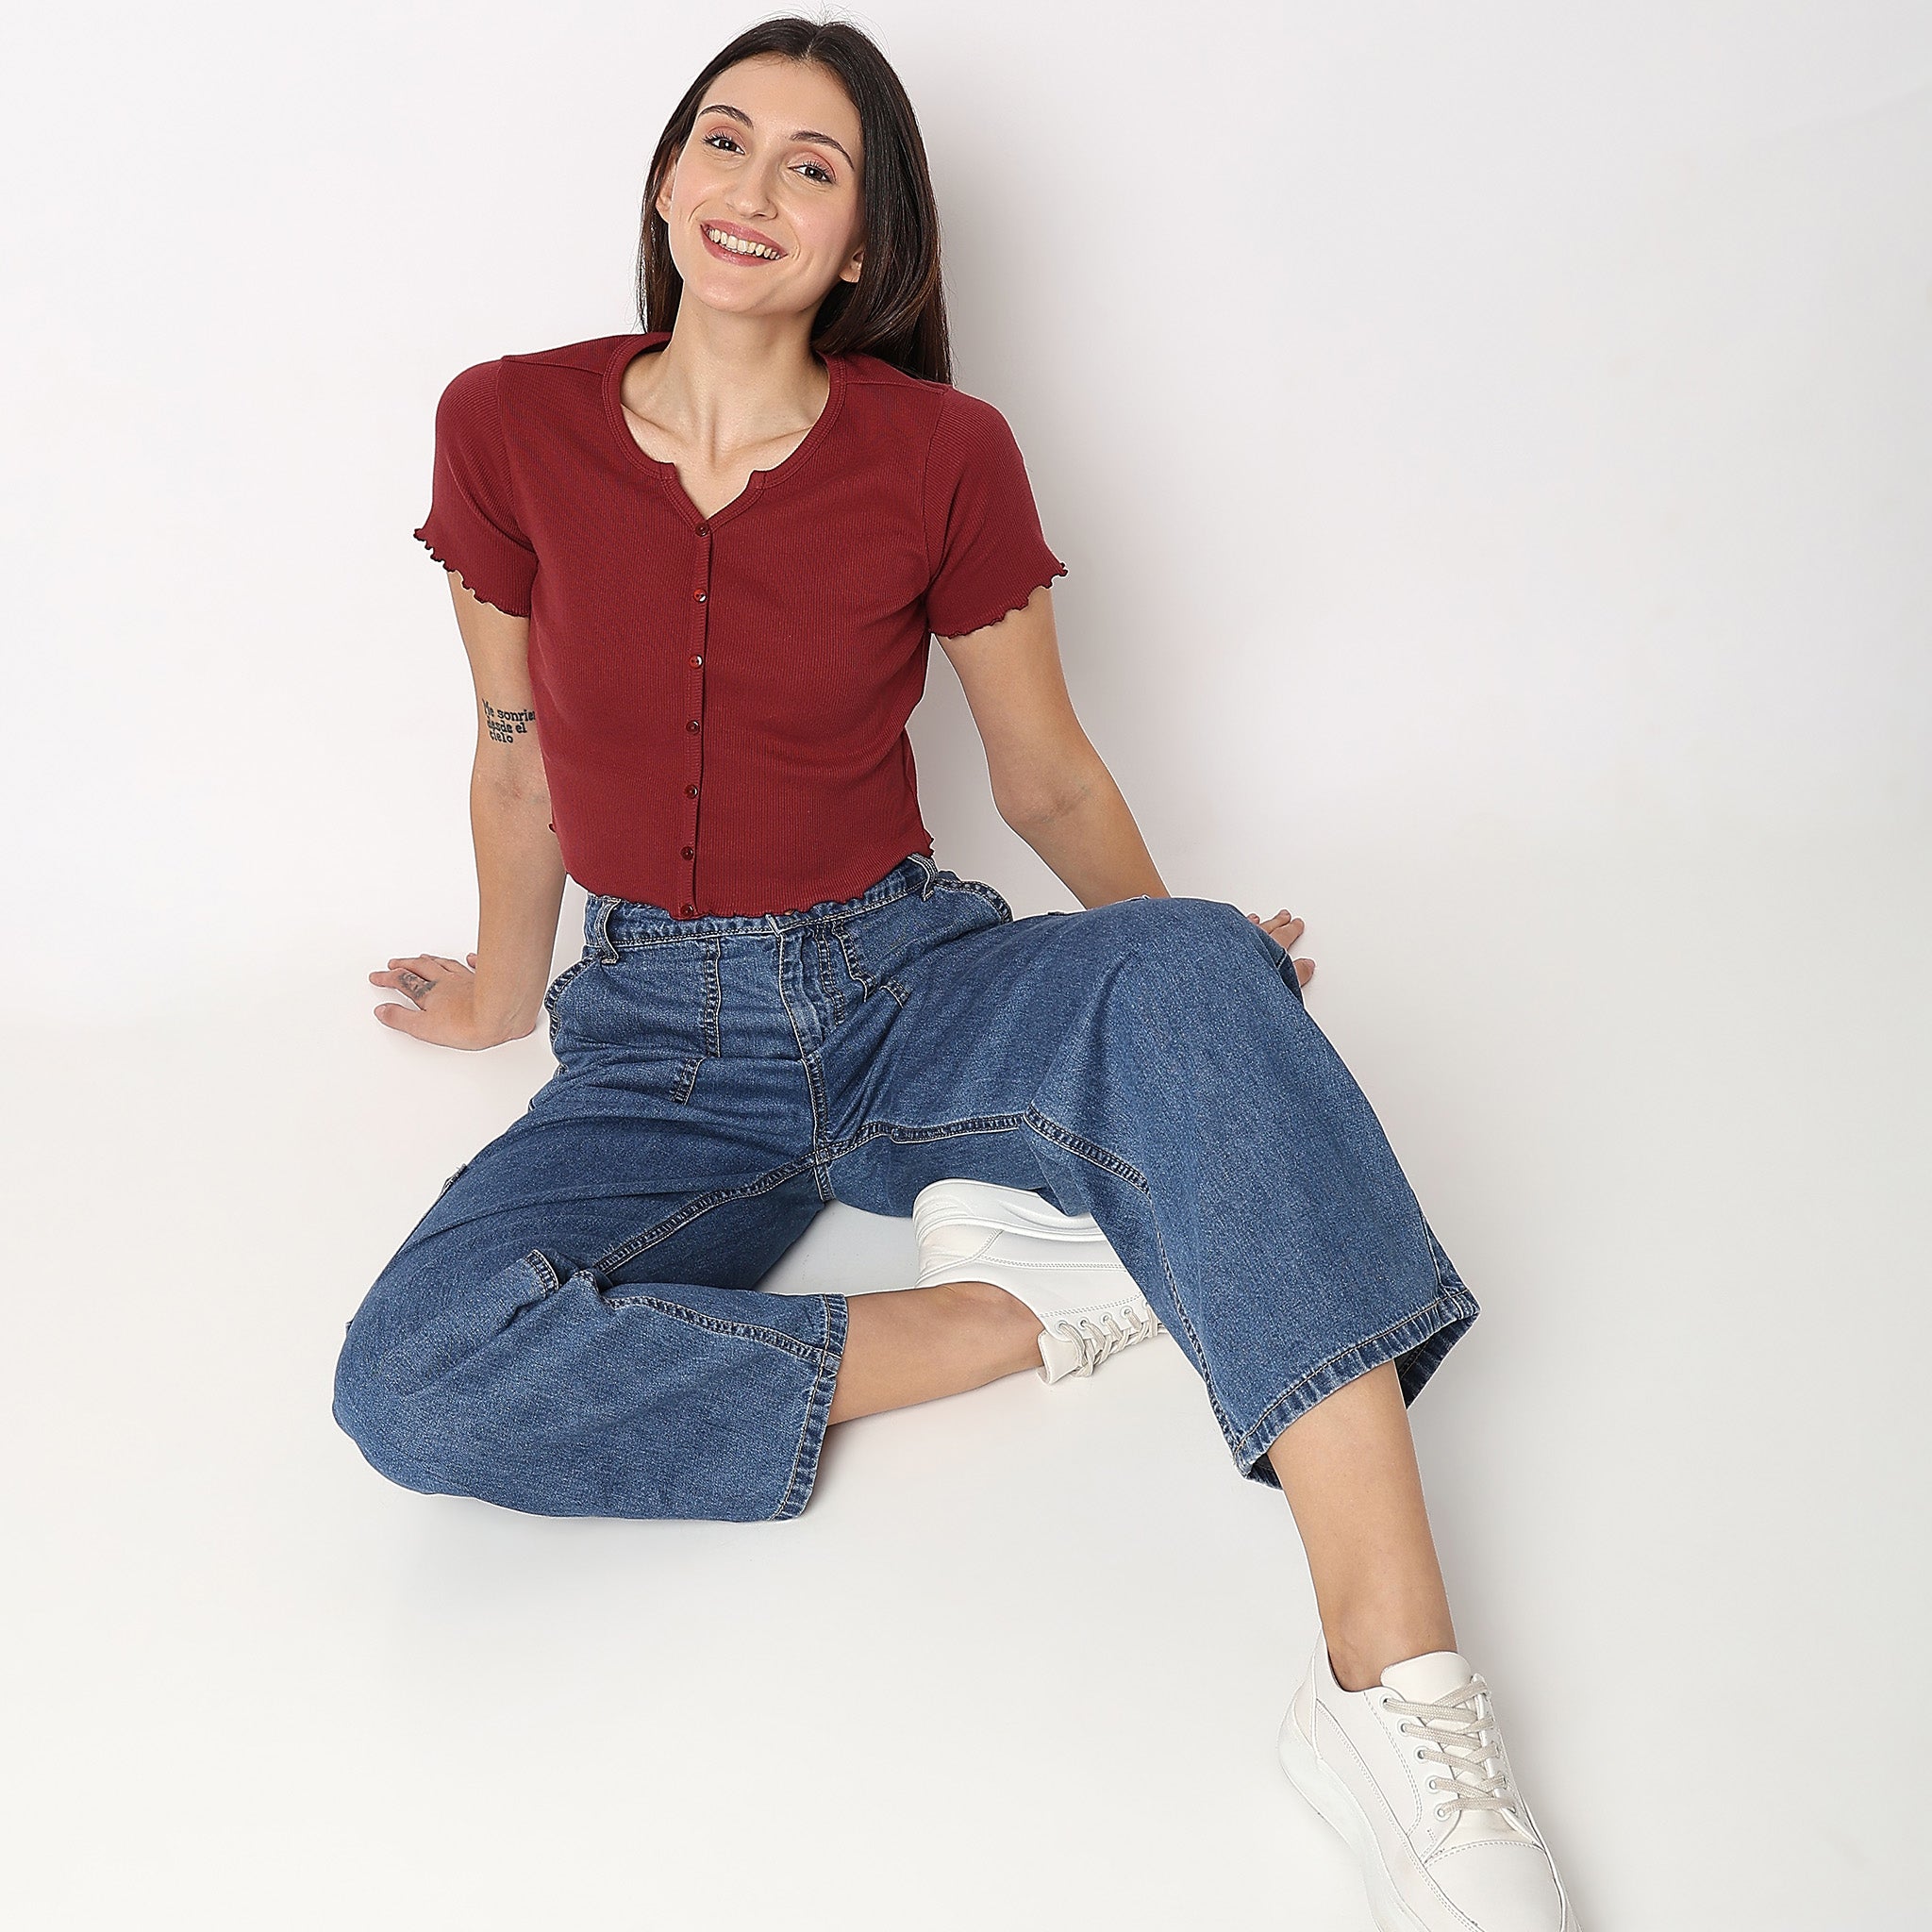 Women Wearing Relaxed Fit Solid T-Shirt